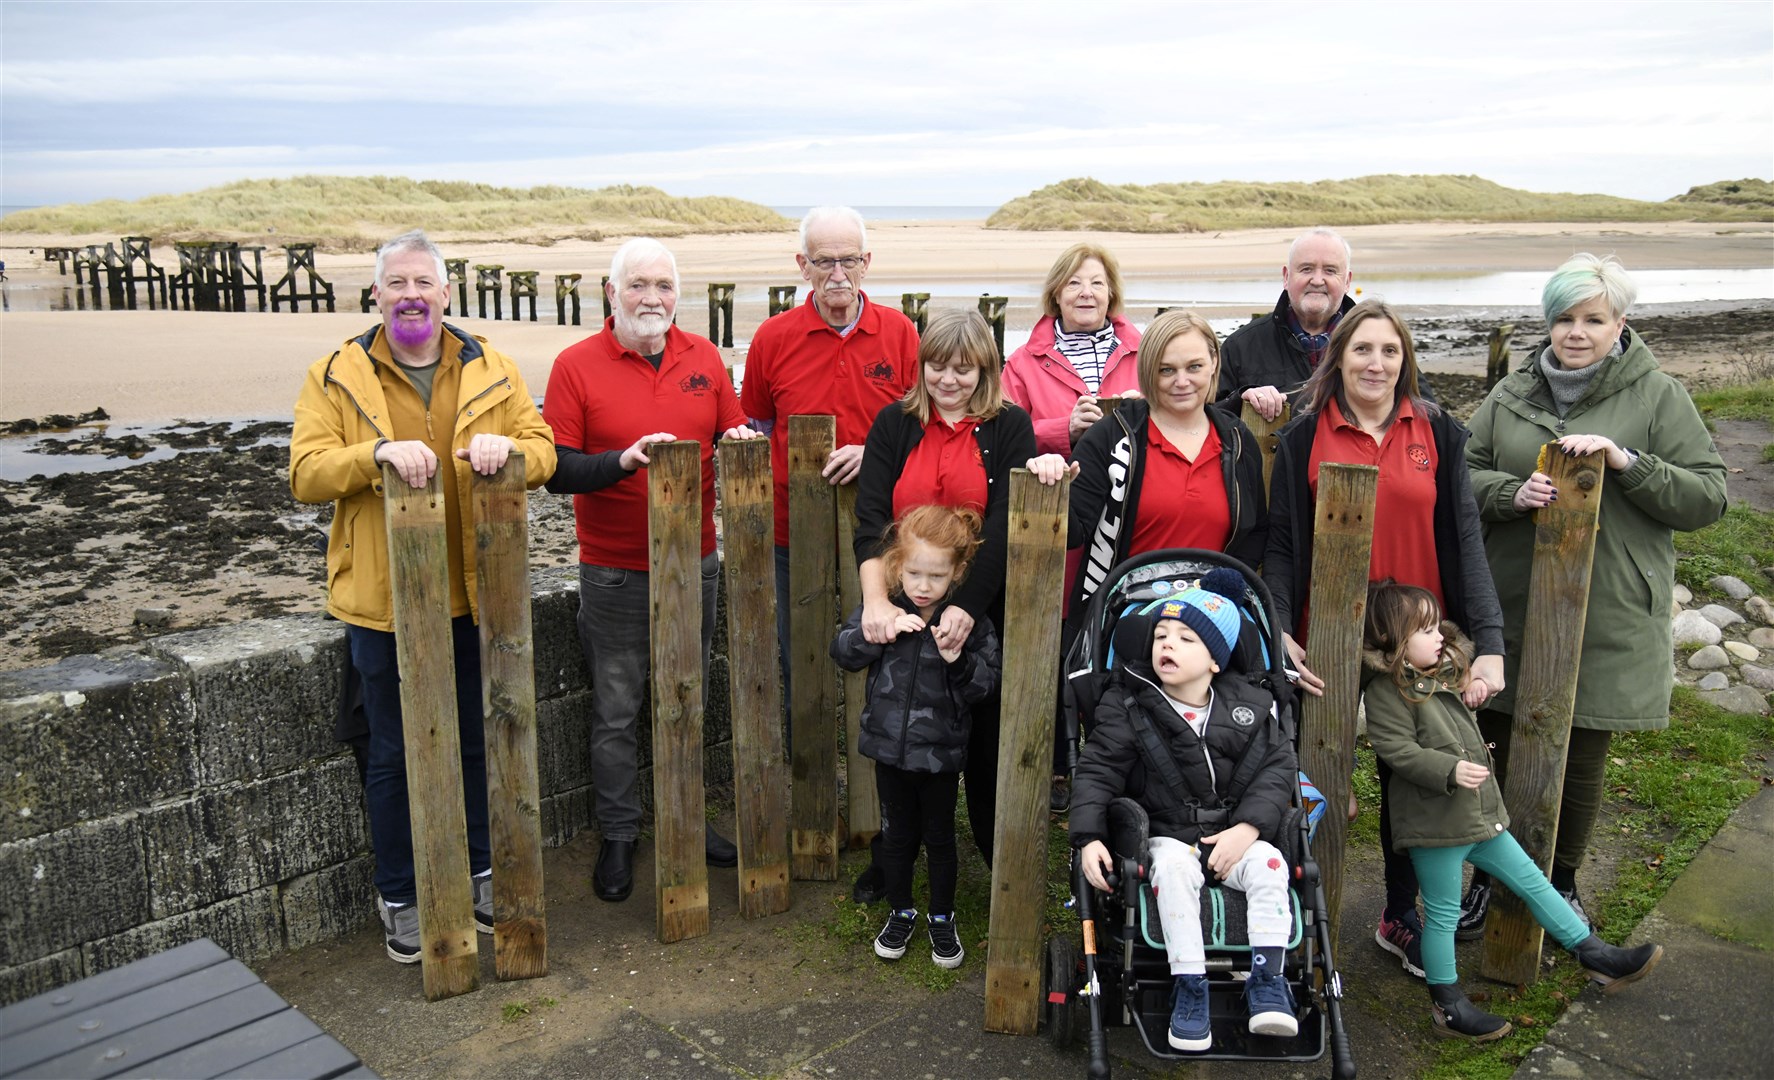 Members from Elgin Men's Shed, Lossiemouth Business Association, Lossiemouth Community Development Trust and The Ladybird Developmental Group are selling parts of the old bridge at Lossiemouth for charities...Picture: Beth Taylor.